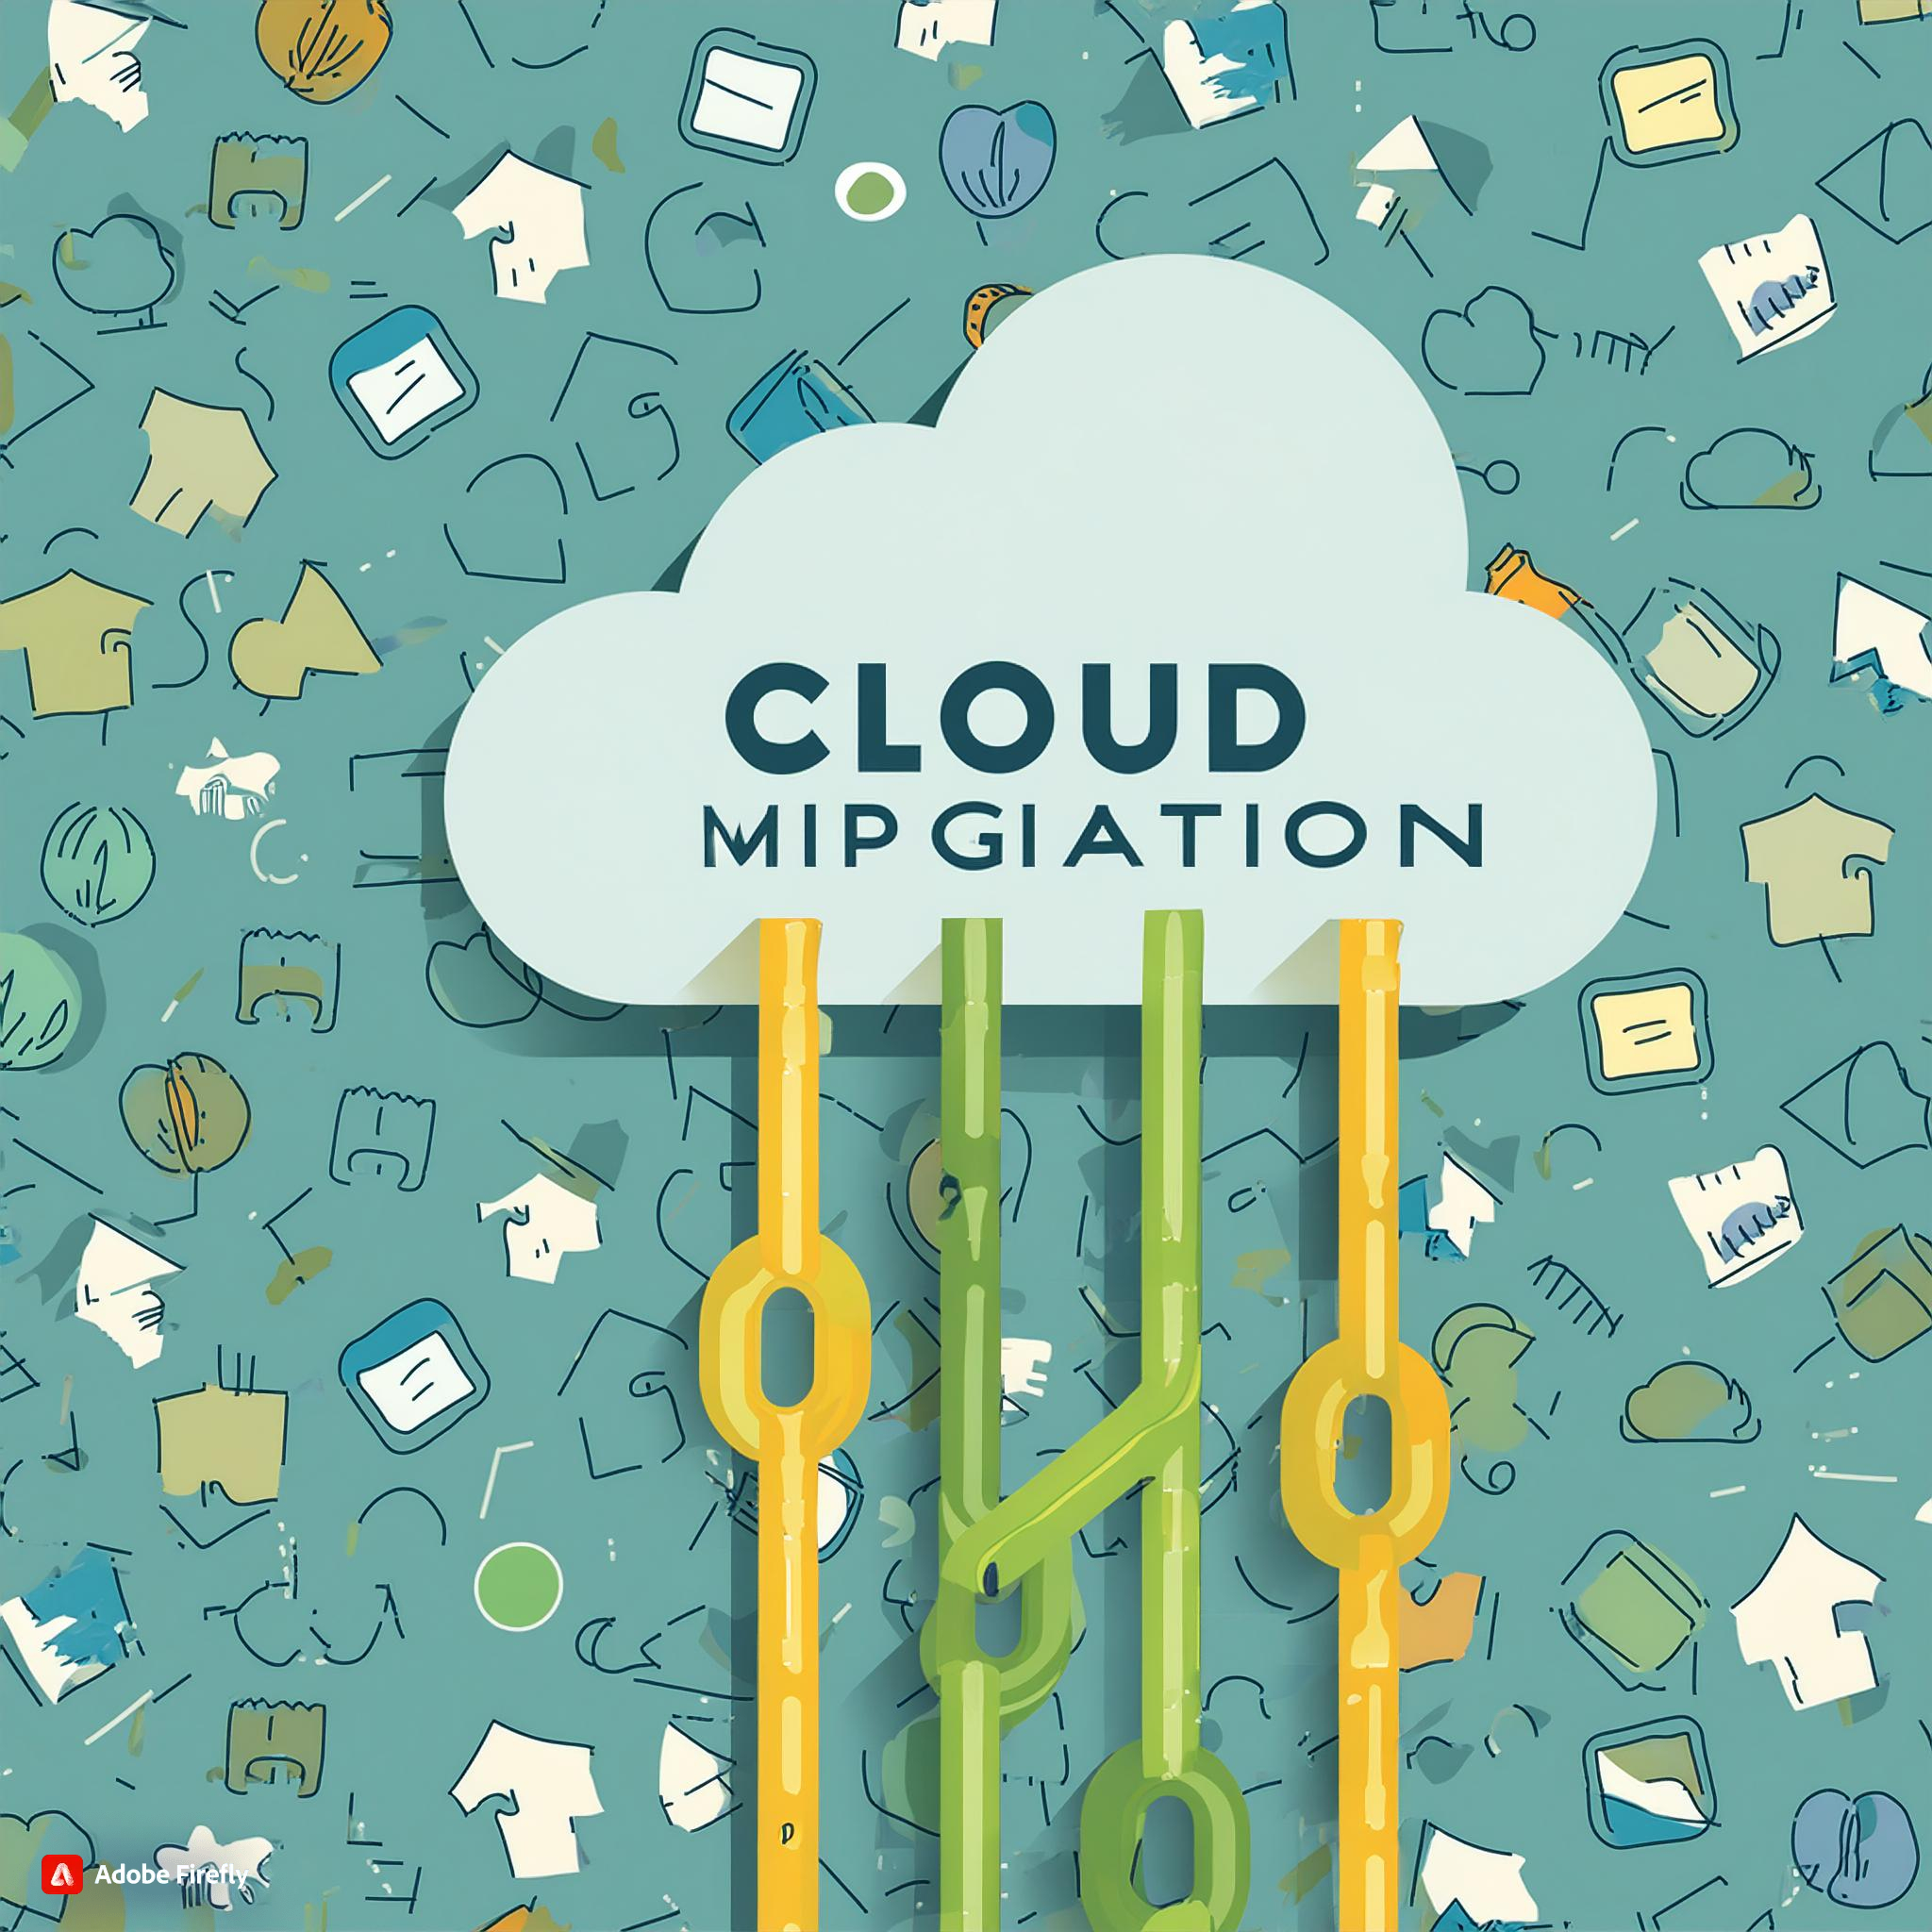 Case Studies: Successful Cloud Migrations and What We Can Learn